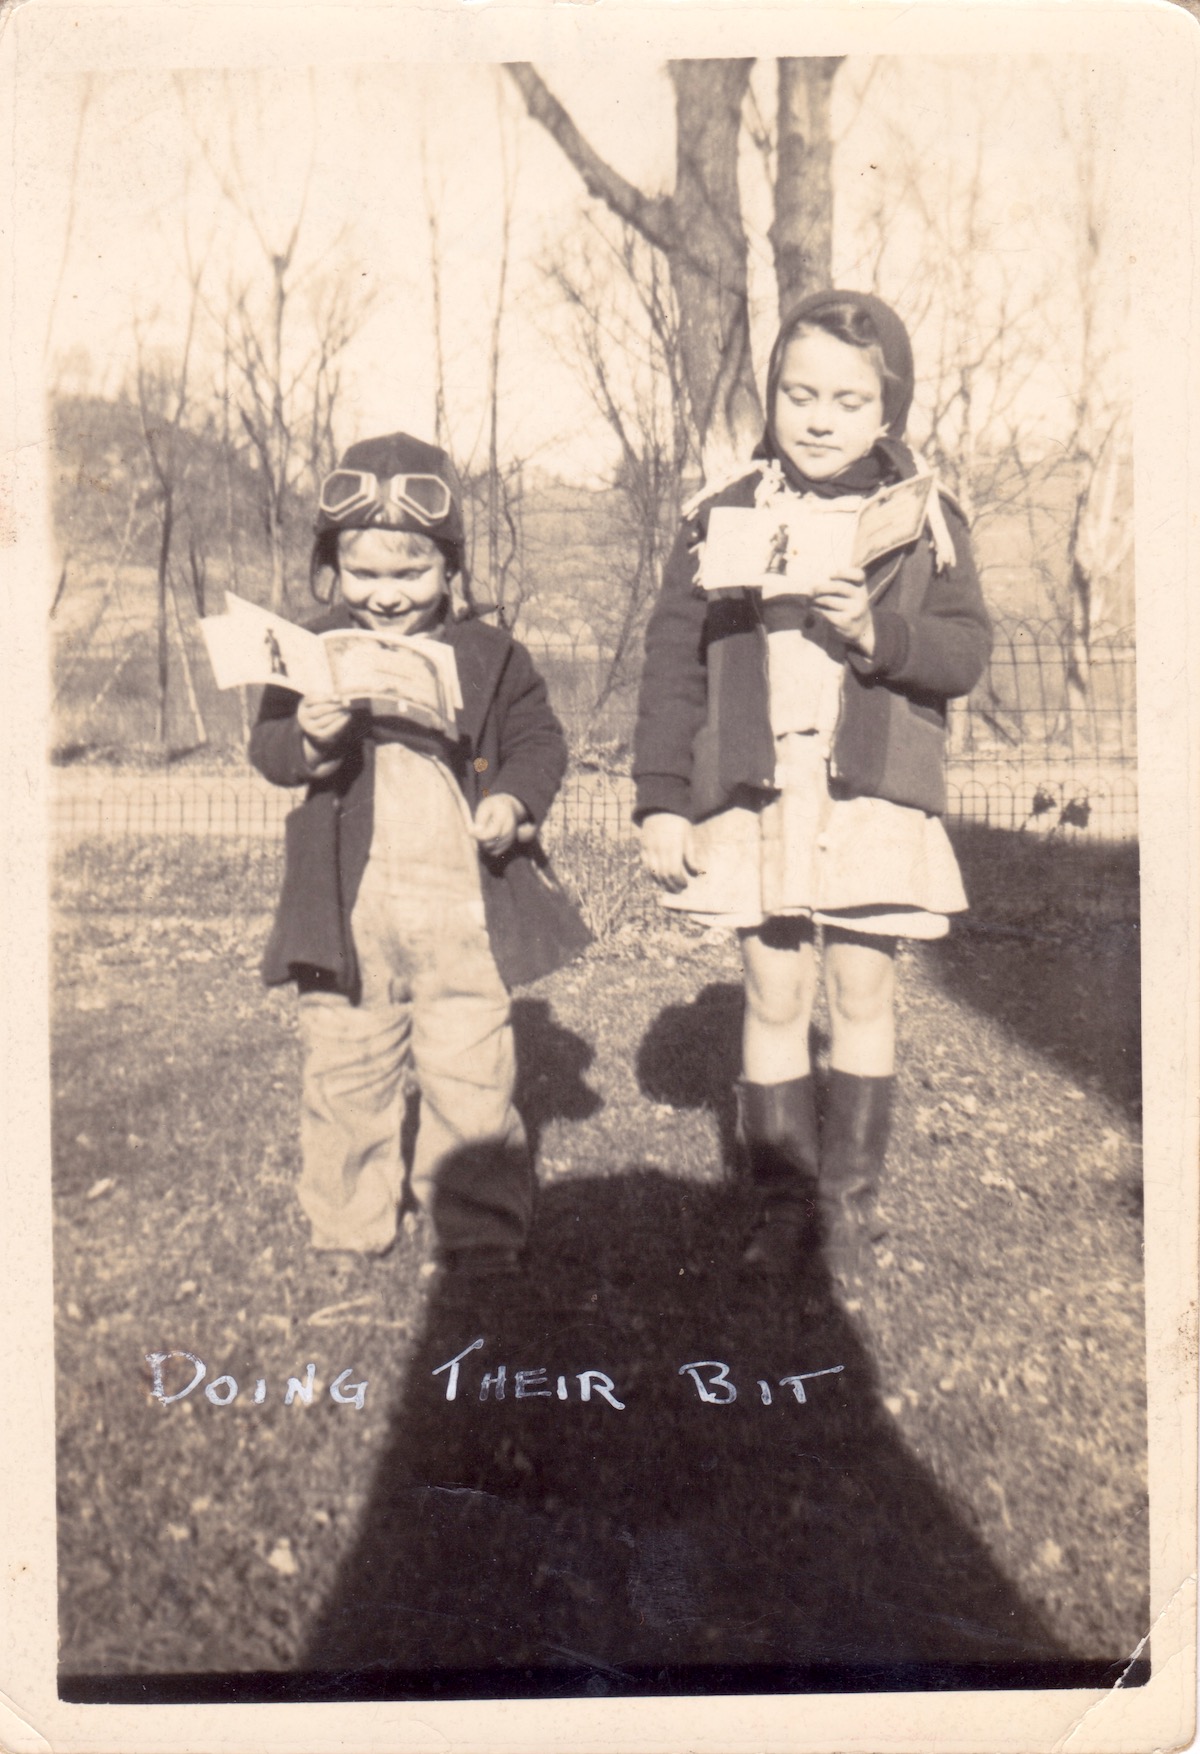 K.C. Potter and Ann Potter (sister) with their war ration stamps during WWII at their home, Fallsburg, KY.